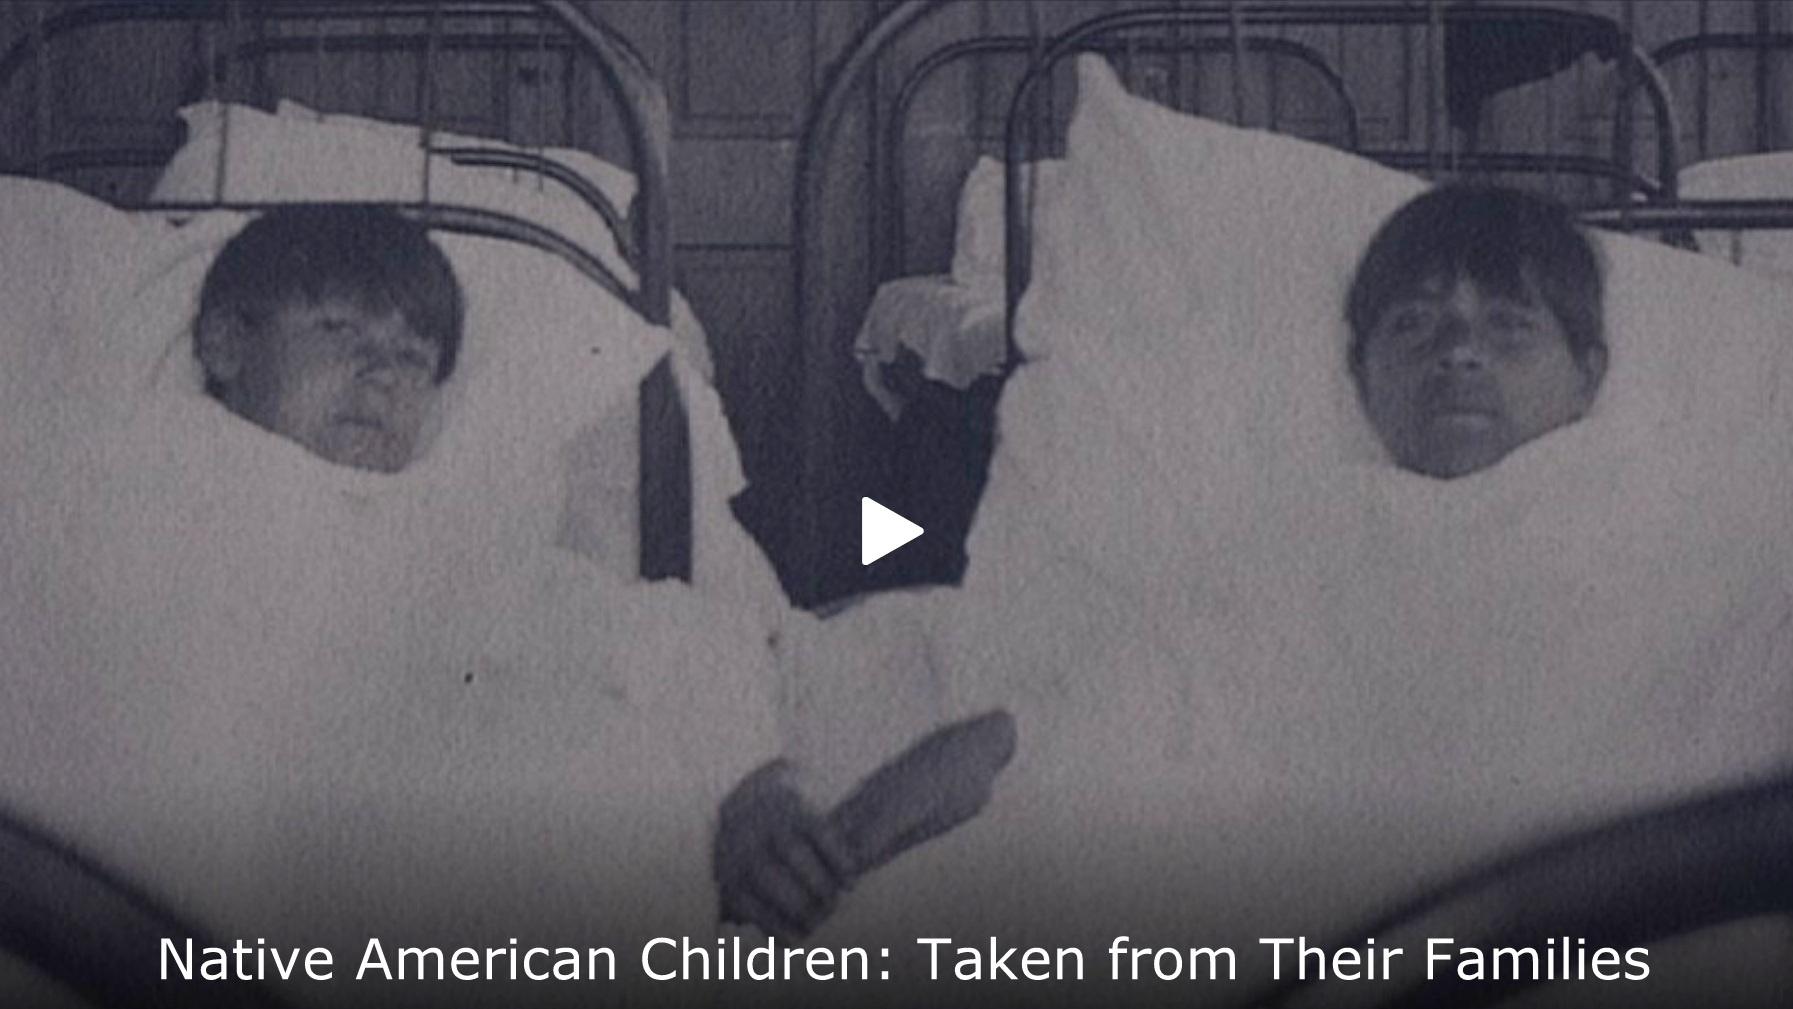 Archival photo of two Native American boys laying in hospital beds. 